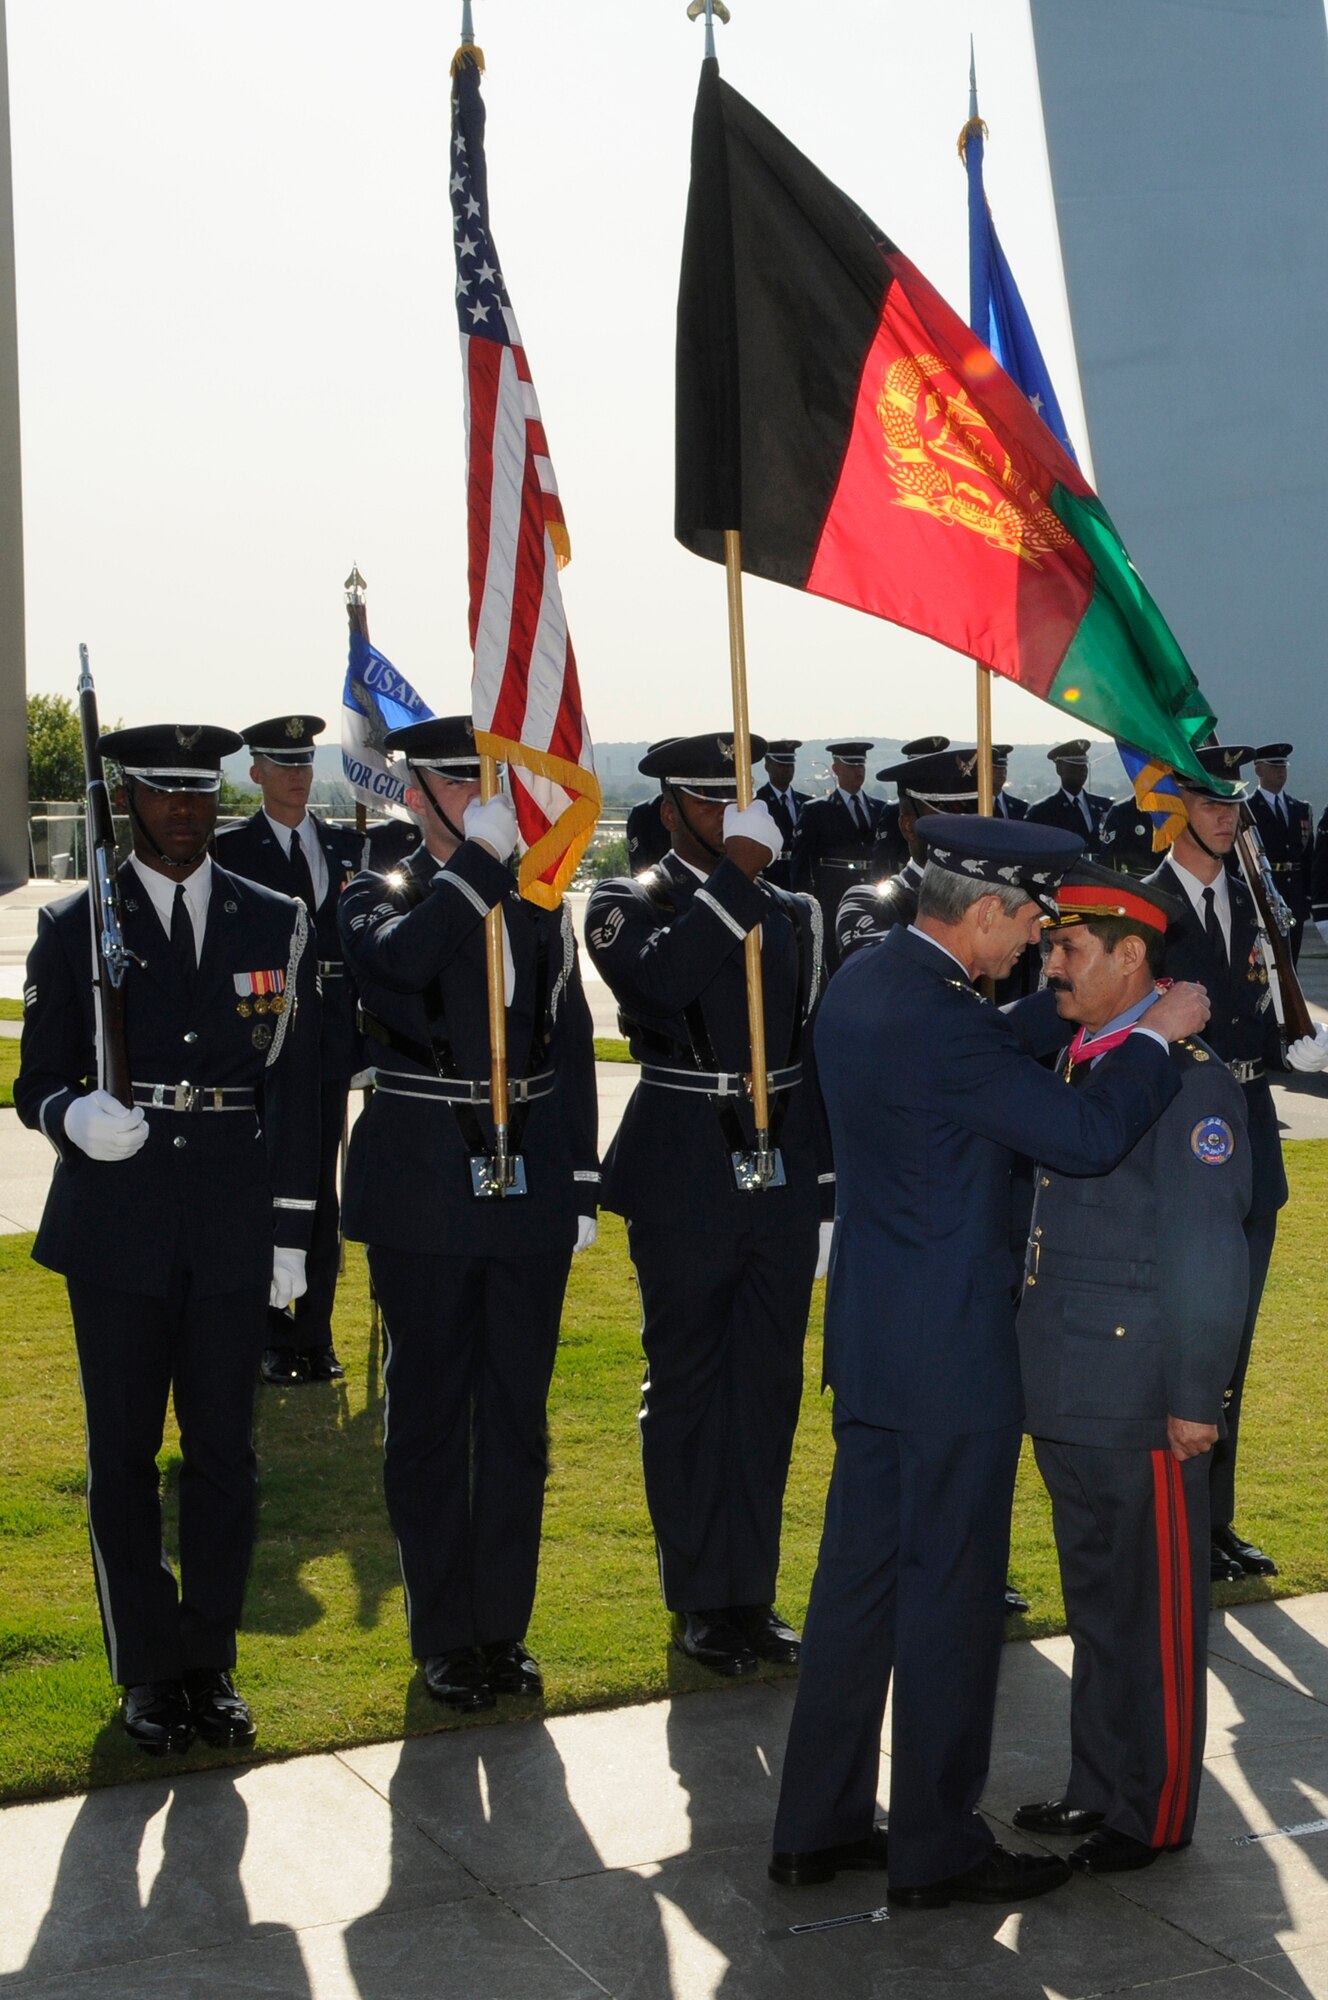 Gen. Norton Schwartz, Air Force chief of staff, presents the Legion of Merit, to Maj. Gen. Mohammad Dawran, commander Afghan National Army Air Corps, during a ceremony July 14 at the Air Force Memorial in Arlington, Va. The Legion of Merit is a military decoration of the United States armed forces that is awarded to foreign government political and military figures for exceptional meritorious conduct in the performance of outstanding services and achievements.  (U.S. Air Force photo by Staff Sgt. Dan DeCook)